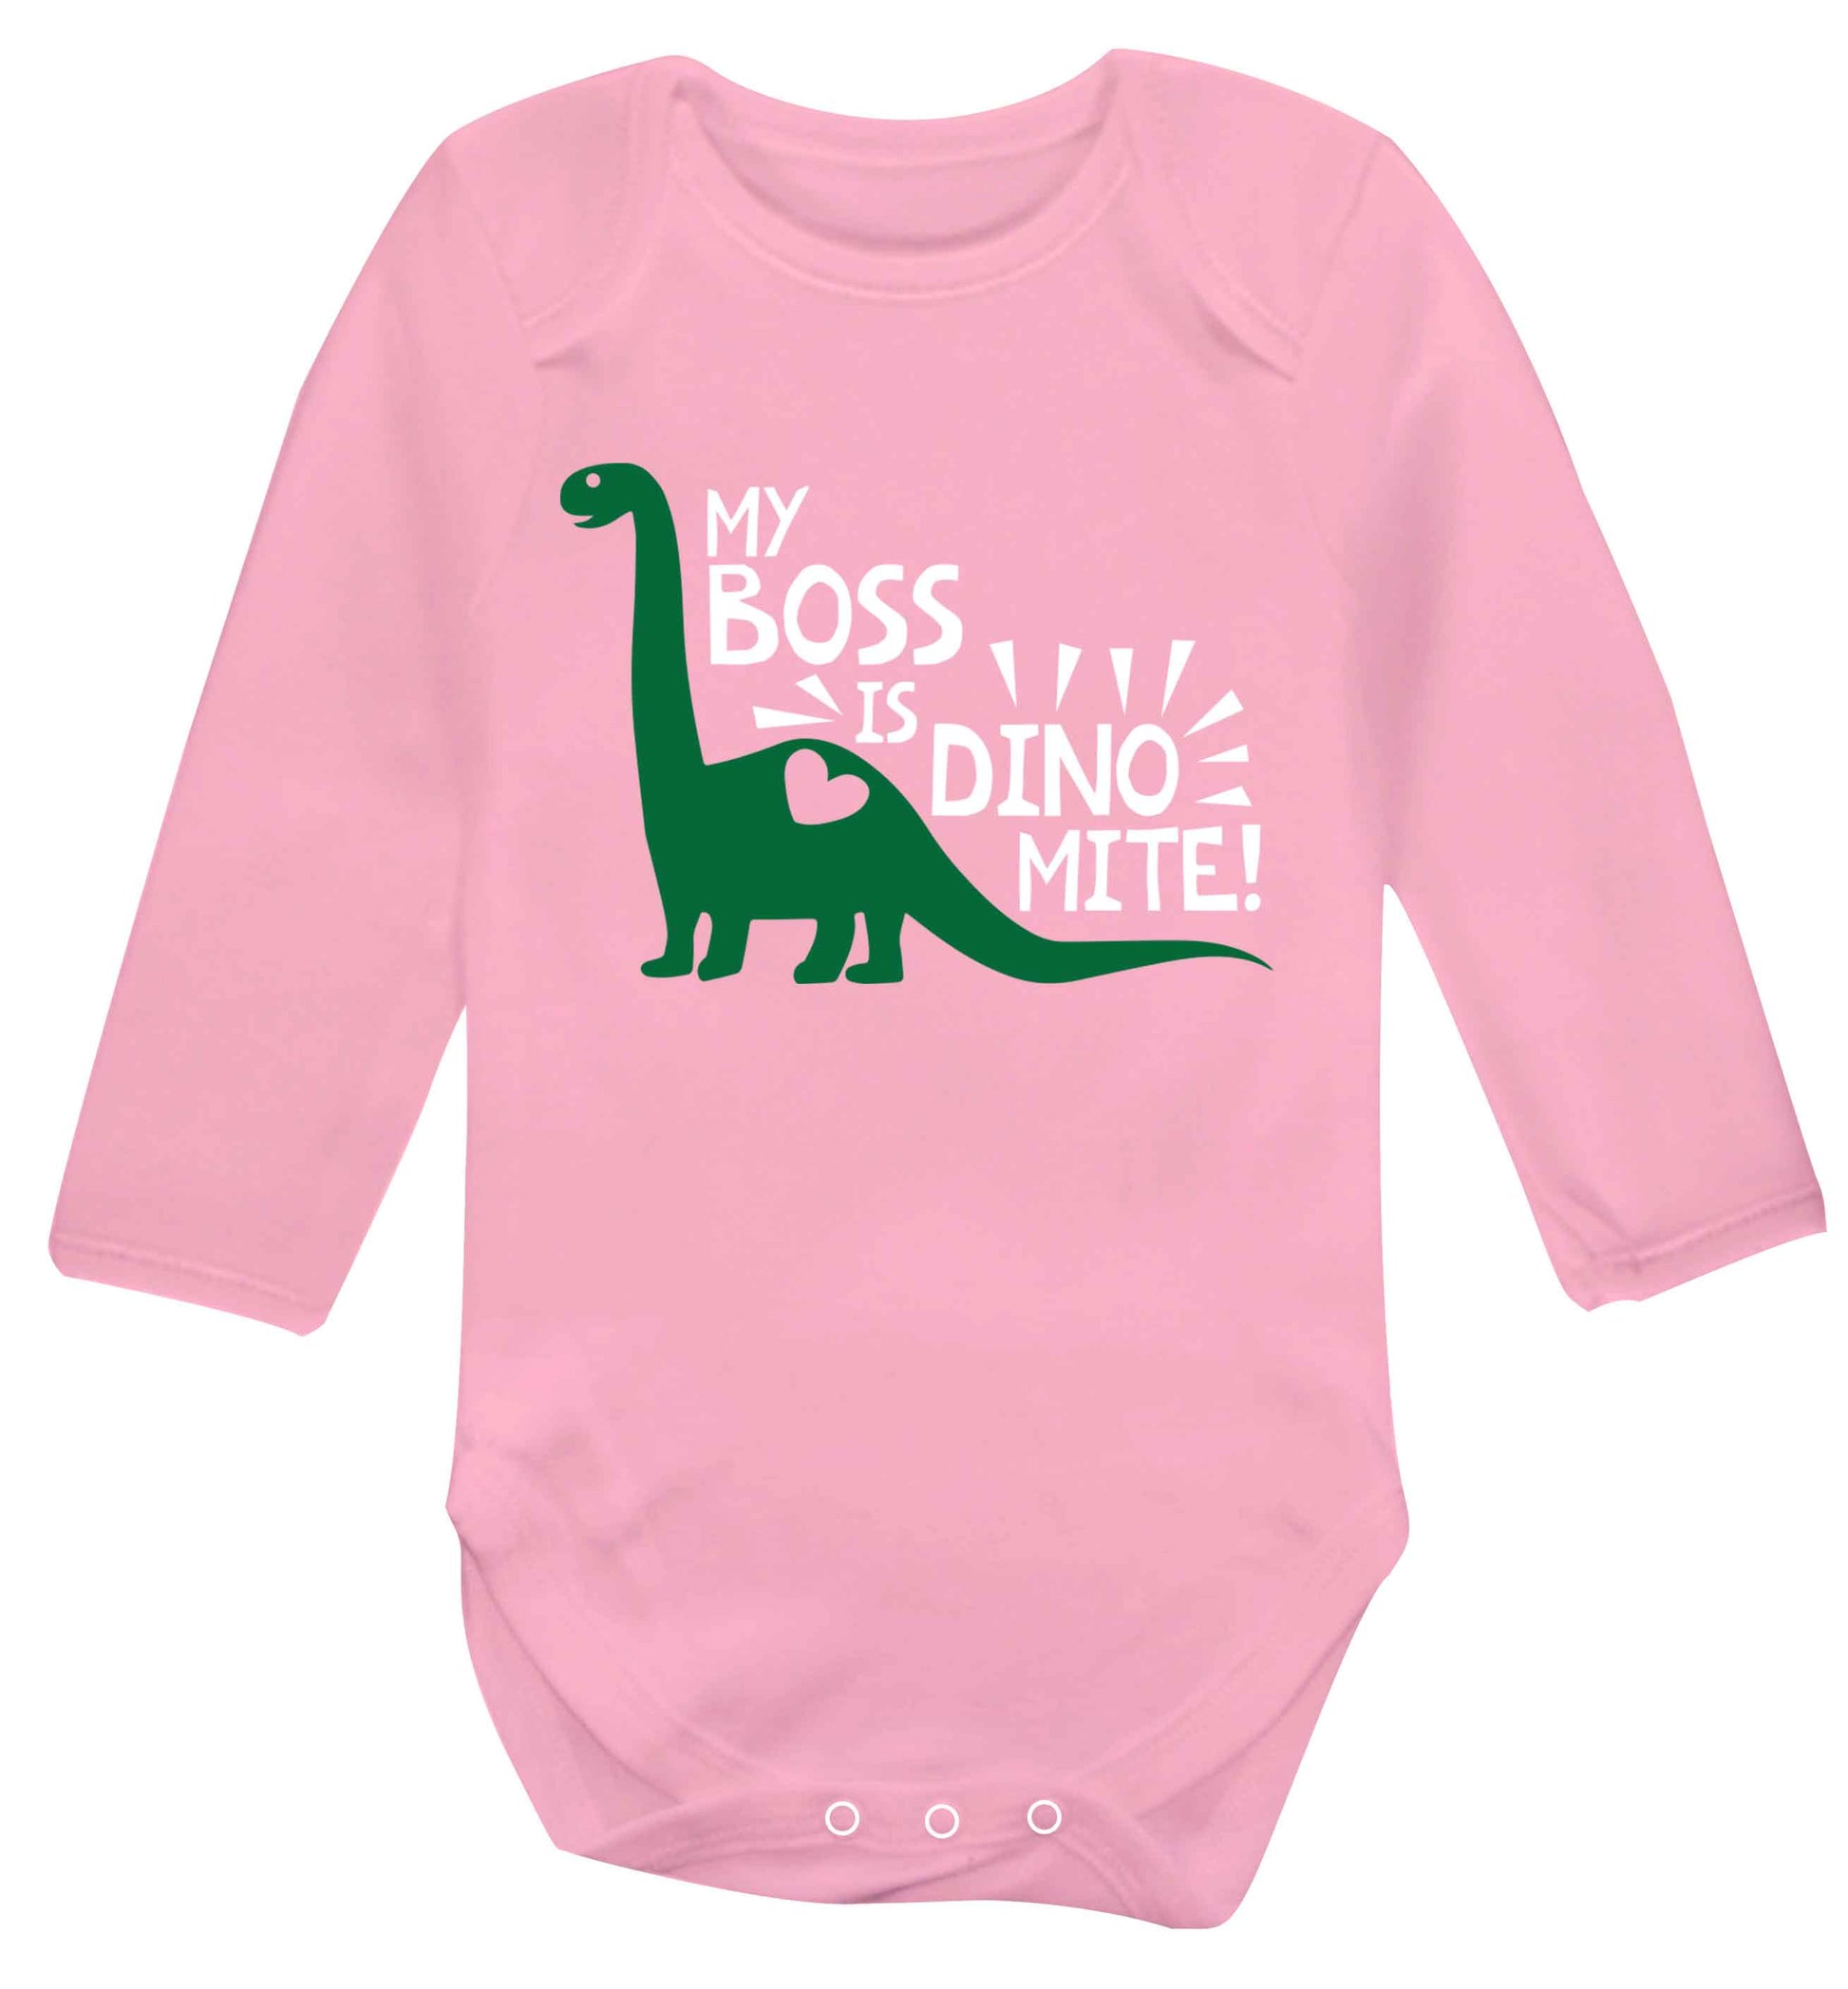 My boss is dinomite! Baby Vest long sleeved pale pink 6-12 months